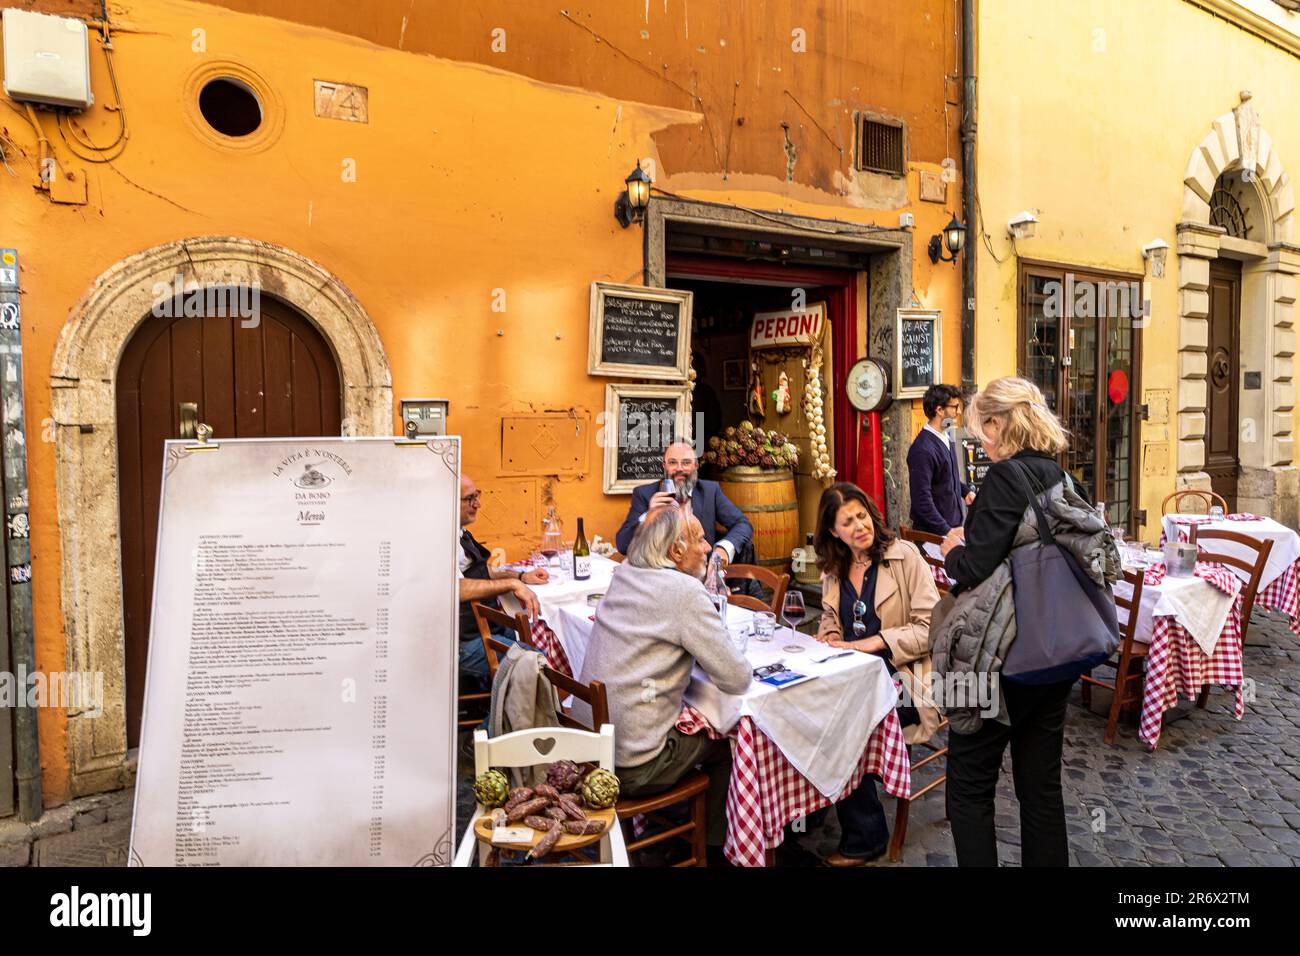 People sitting outside dining atLa vita è’ n’osteria , a small restaurant  in Trastevere, Rome, Italy Stock Photo